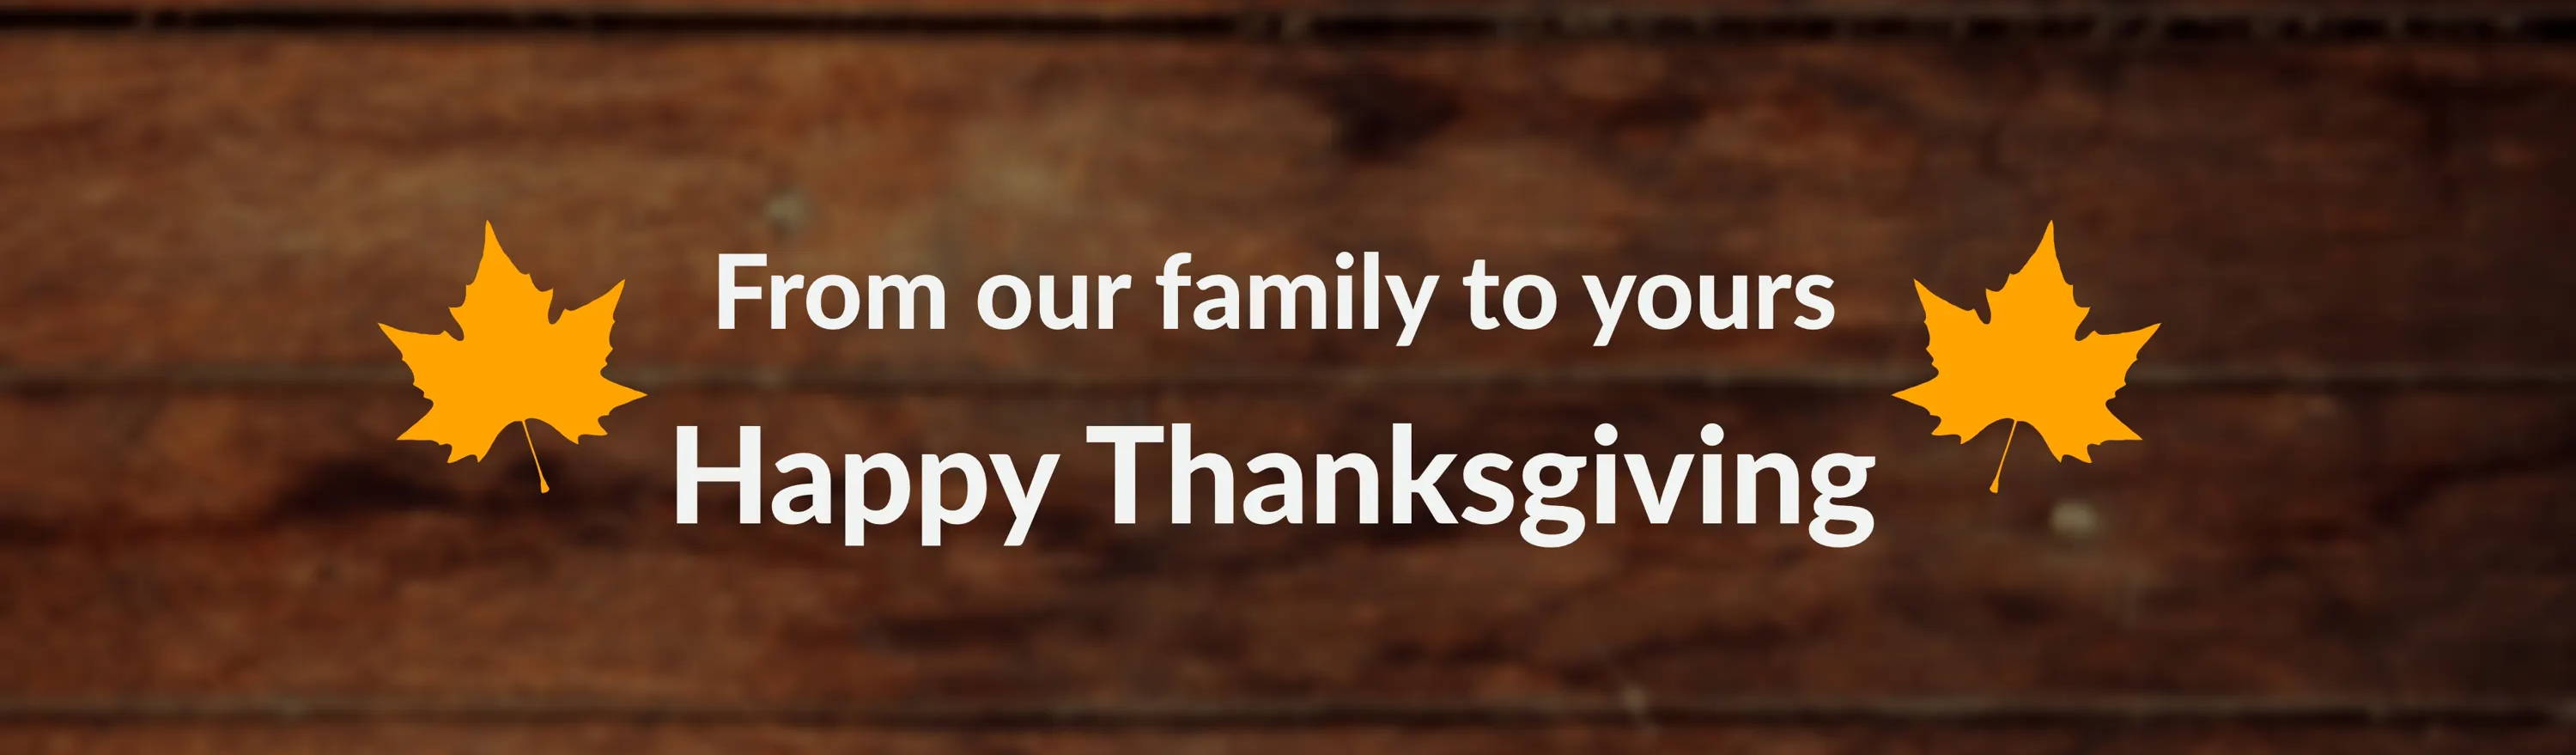 From our family to yours. Happy Thanksgiving.